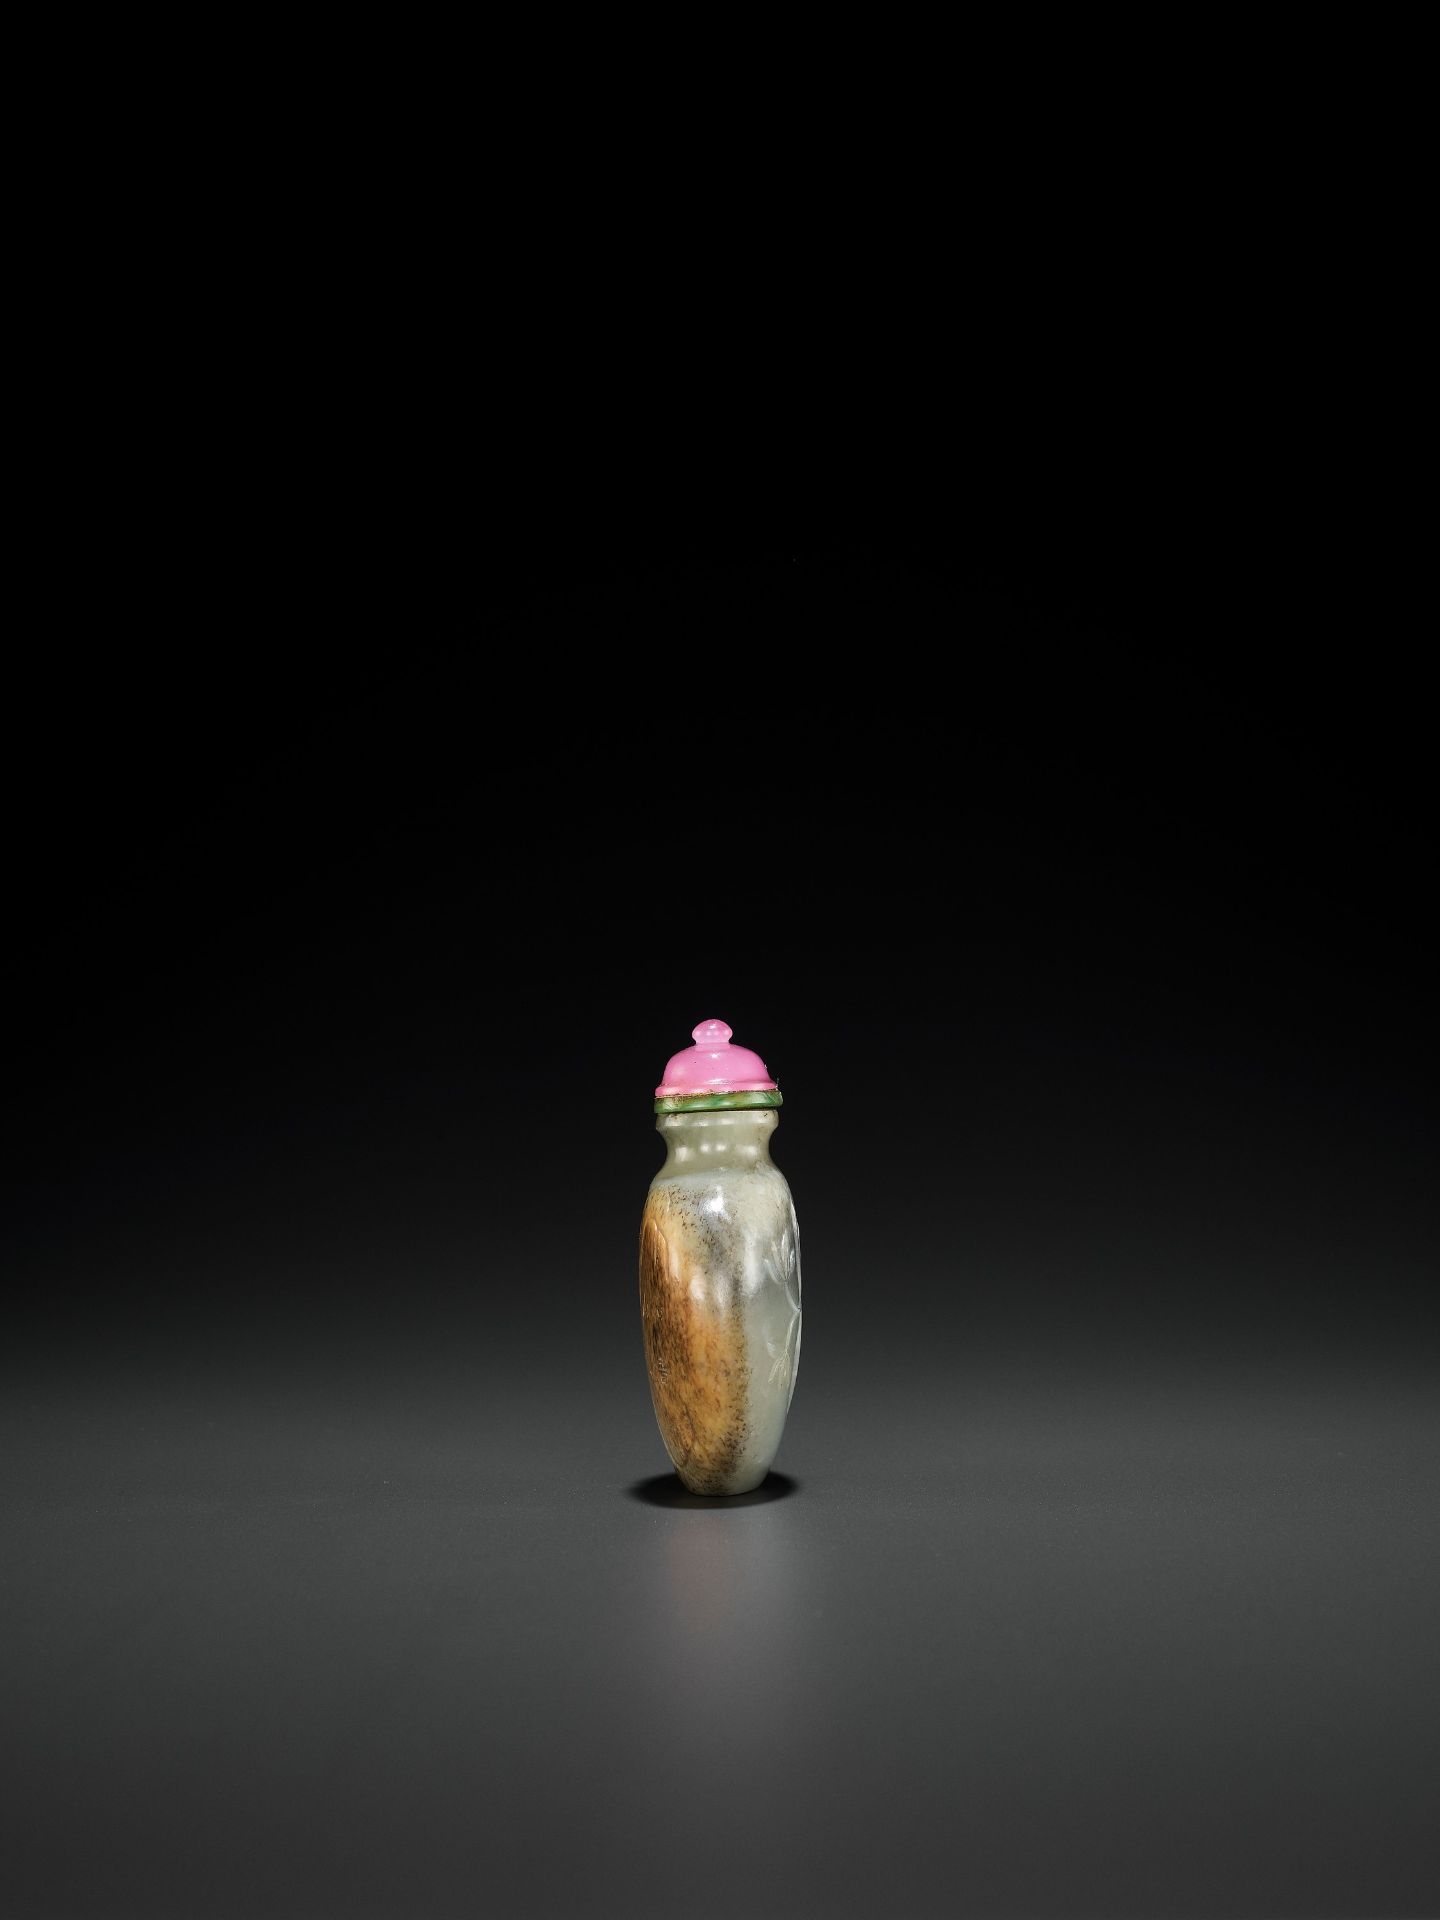 AN INSCRIBED WHITE, GRAY AND RUSSET JADEITE 'TIGER' SNUFF BOTTLE, SIGNATURE OF WANG HENG (1817-1882) - Image 3 of 8